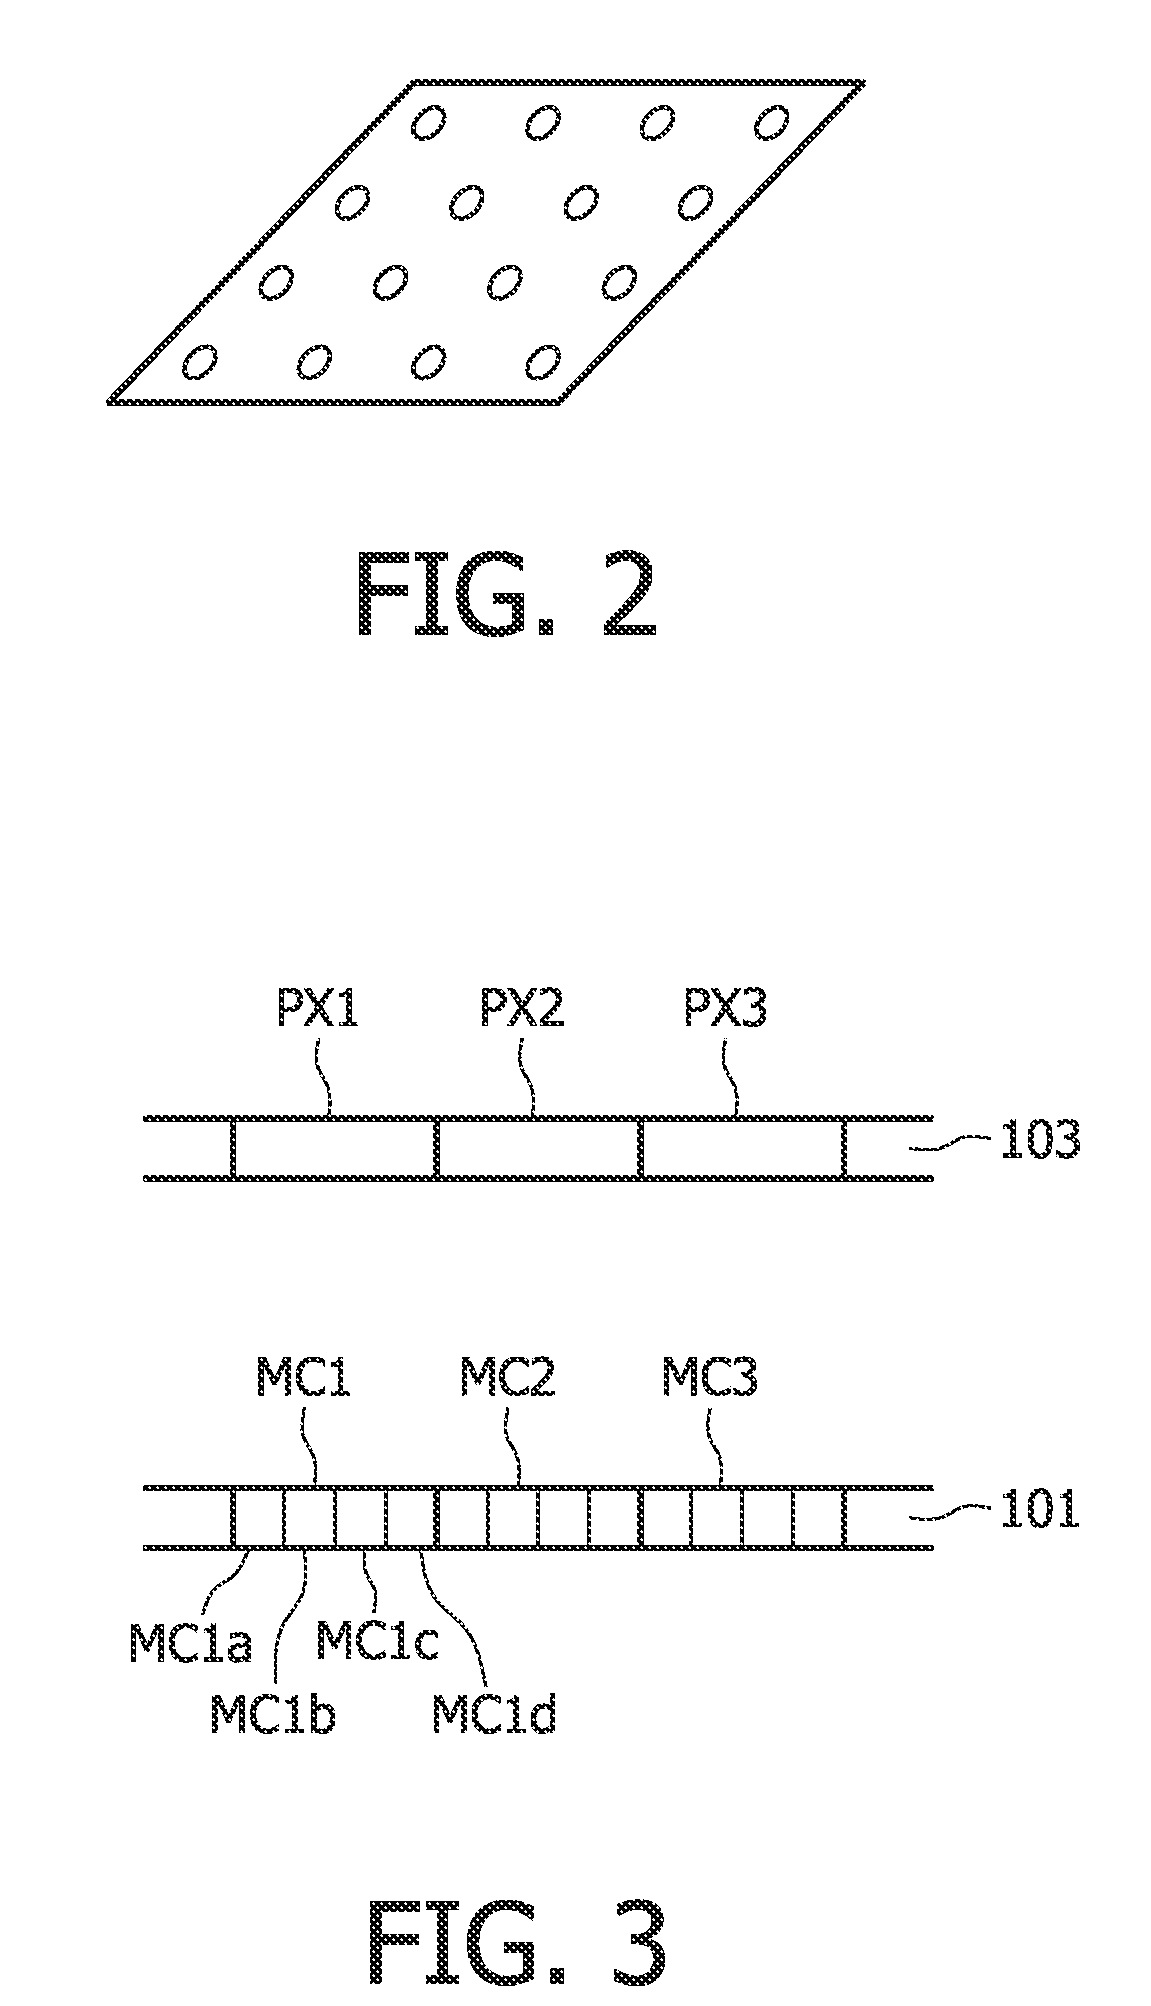 Image processing system and method for silhouette rendering and display of images during interventional procedures